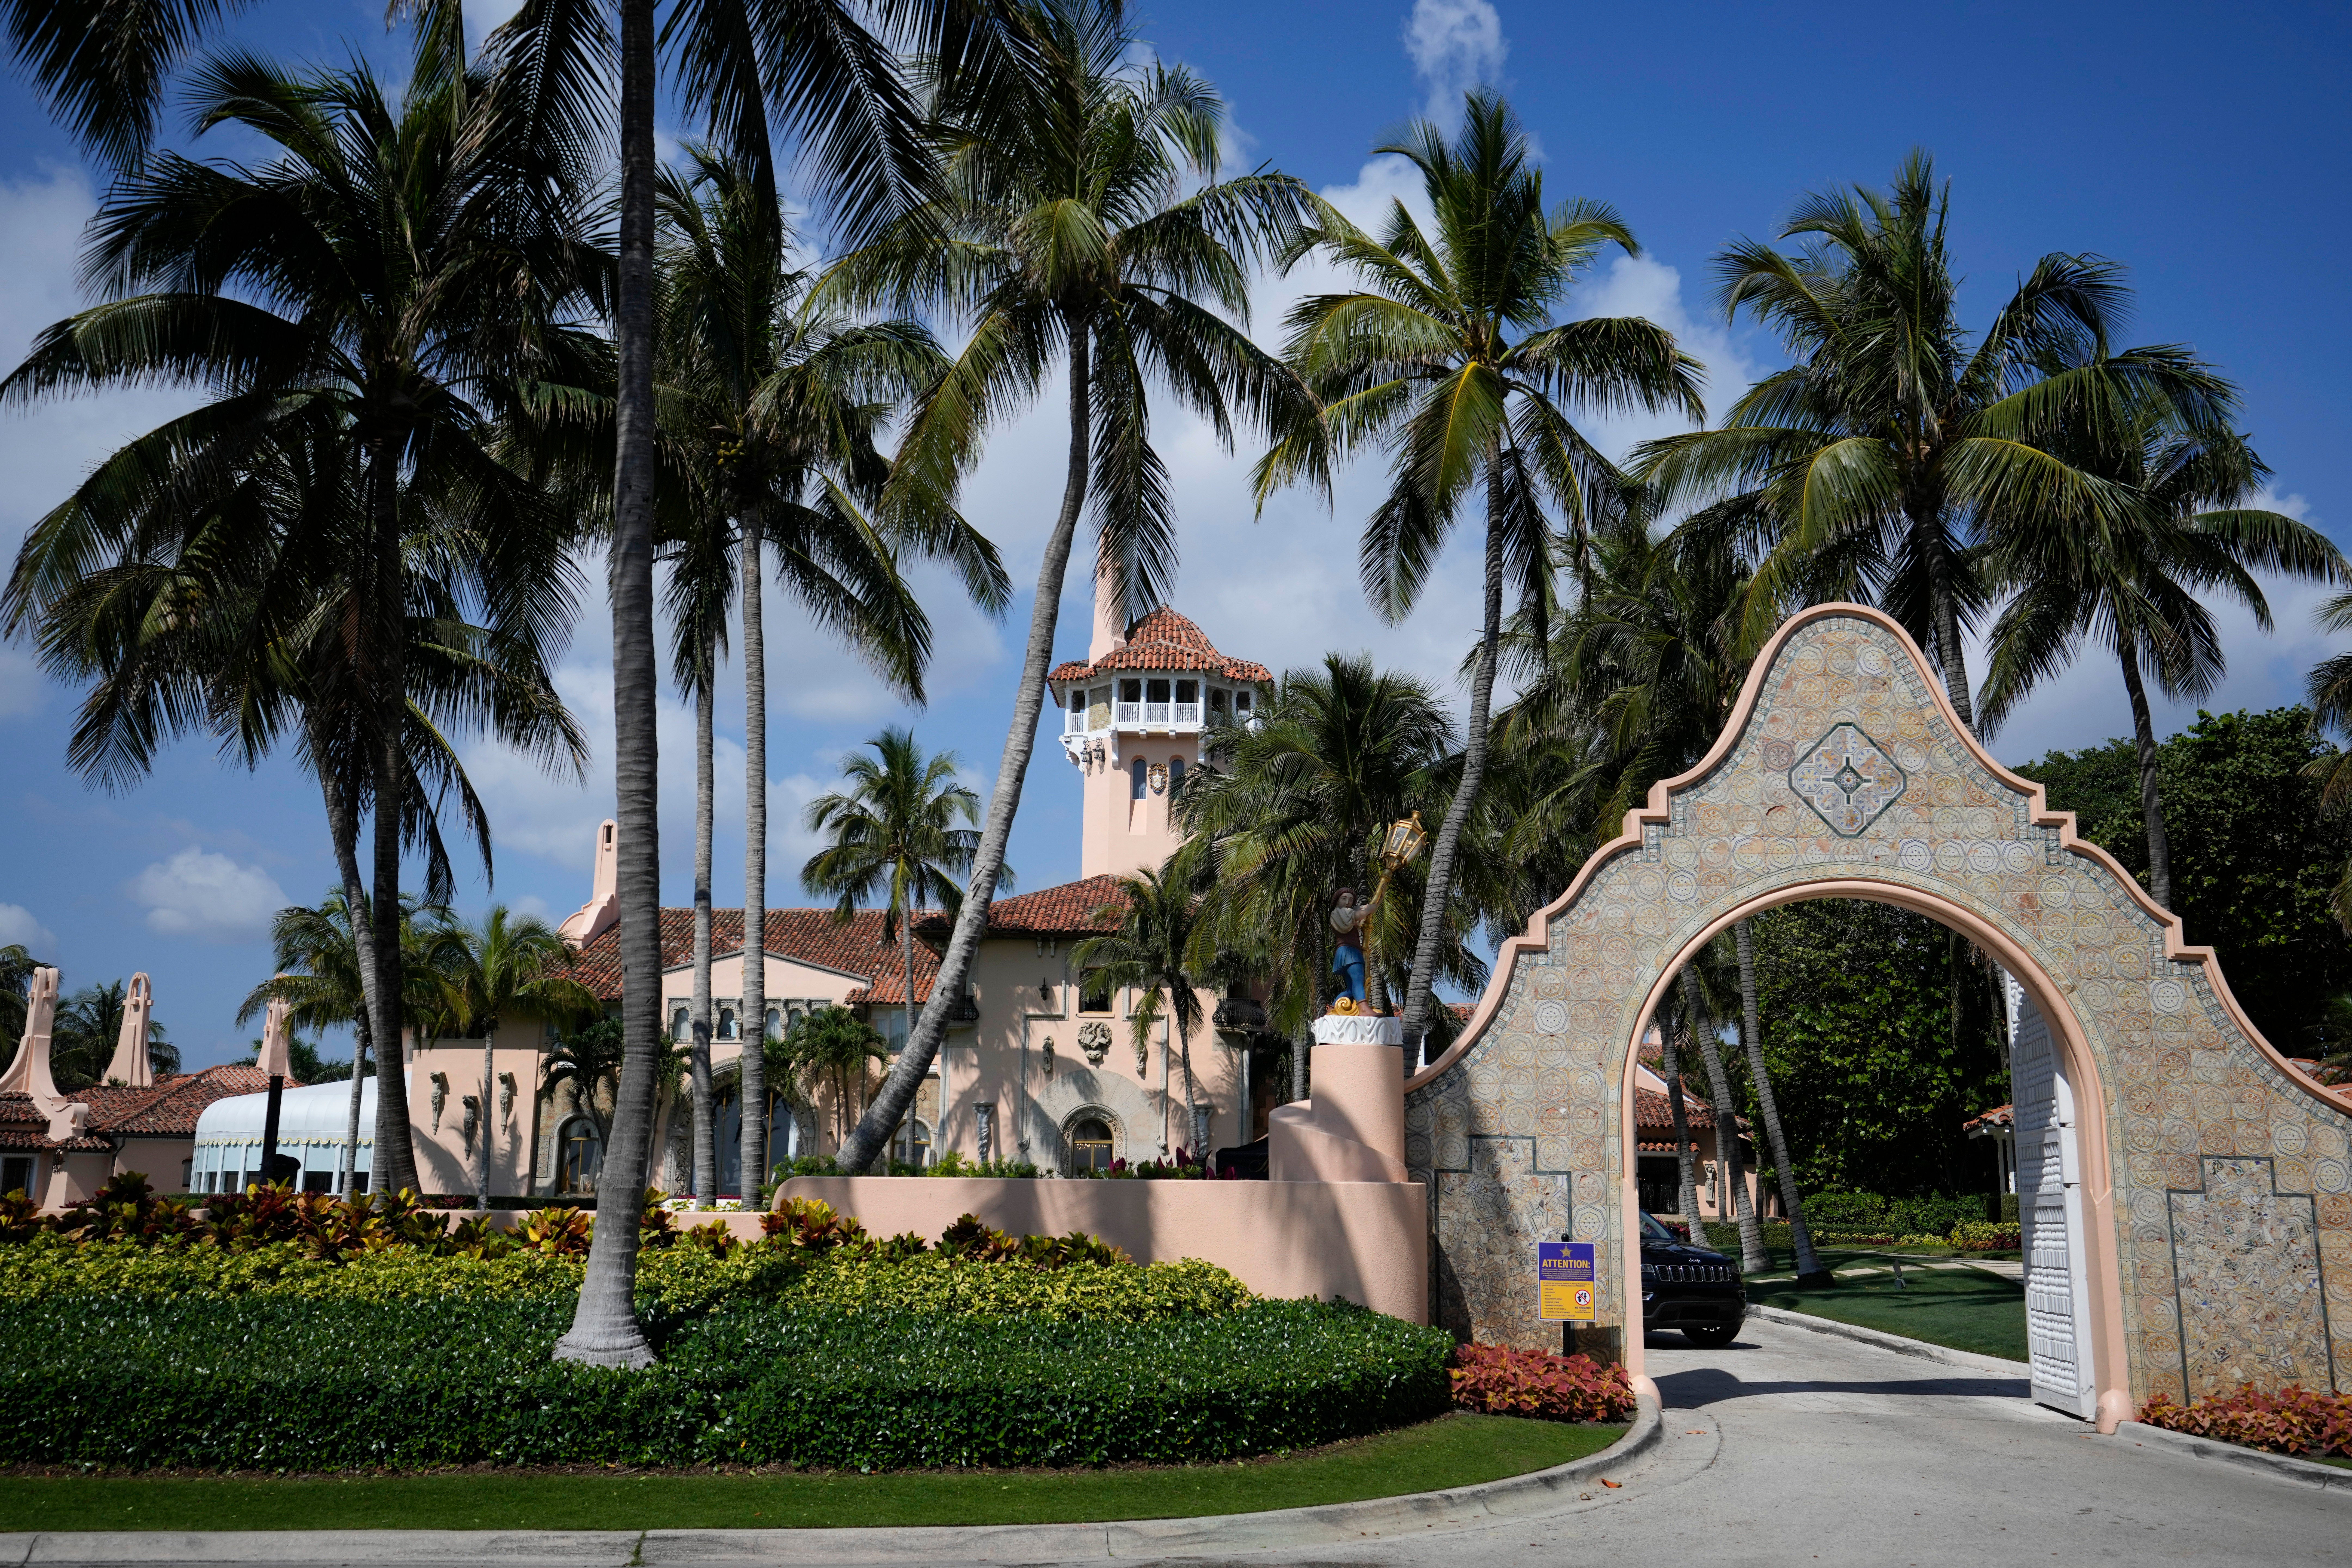 A security car blocks the drive at the entrance to former President Donald Trump’s Mar-a-Lago estate in Palm Beach